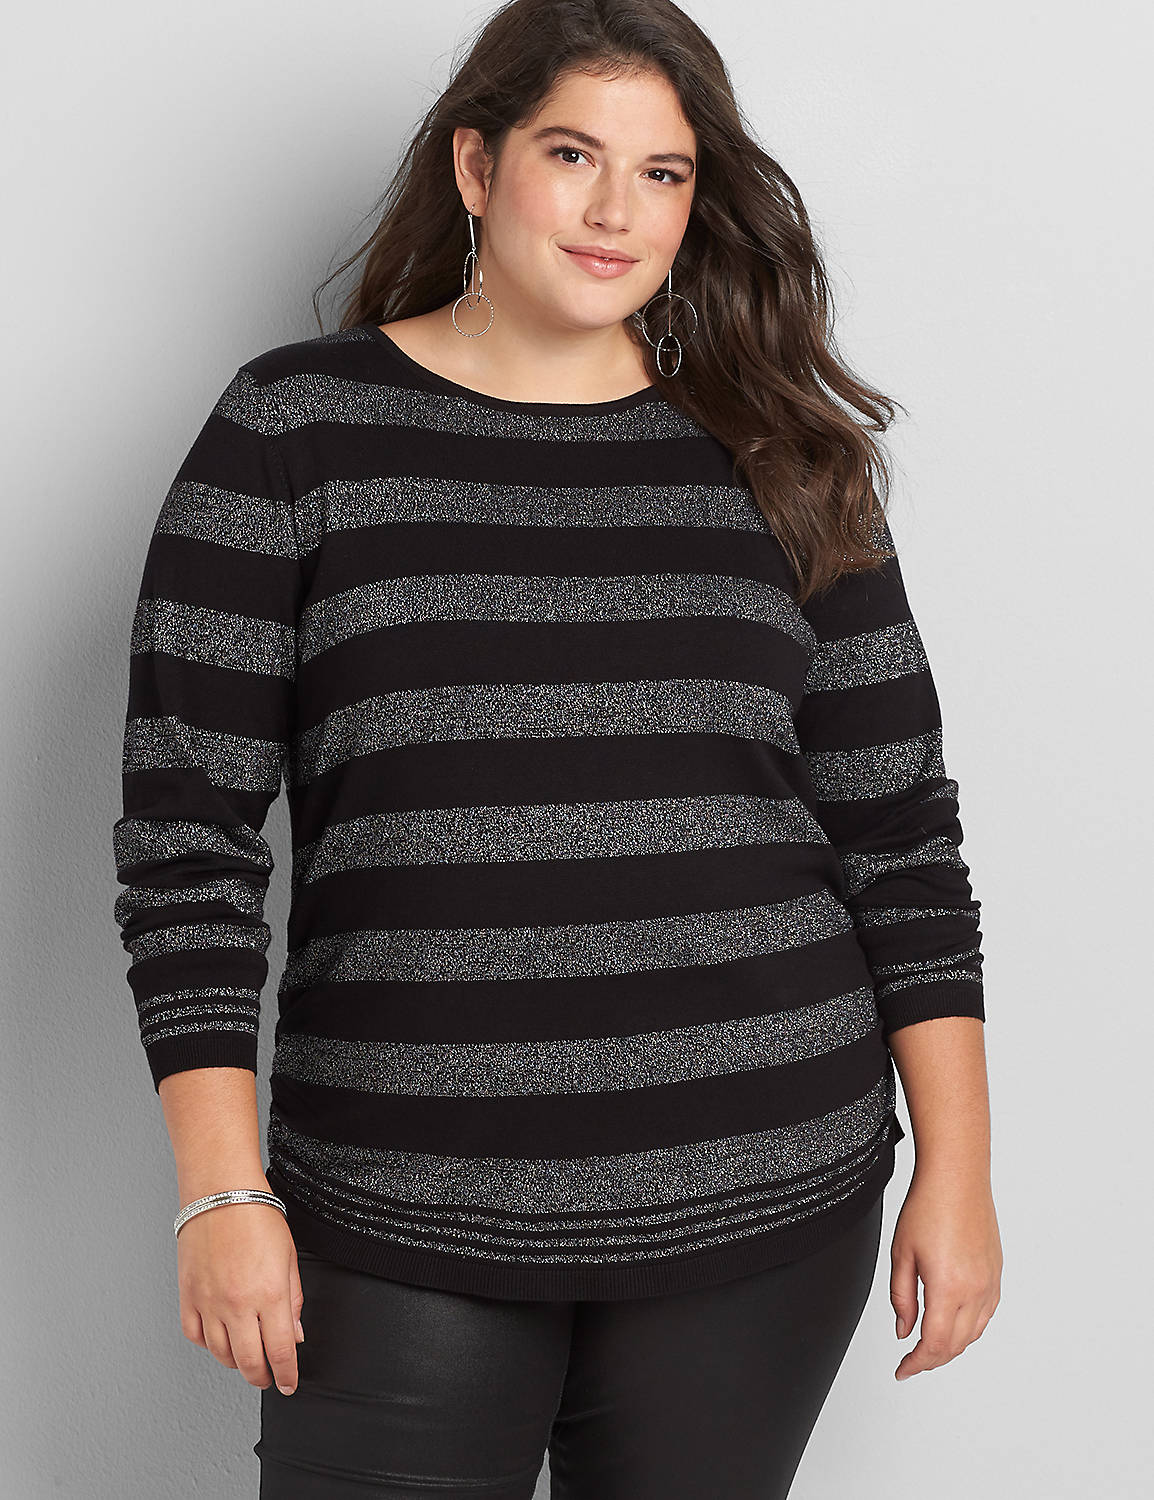 Long Sleeve Boatneck Pullover with Stripes 1118027:Pitch Black LB 1000322:22/24 Product Image 1